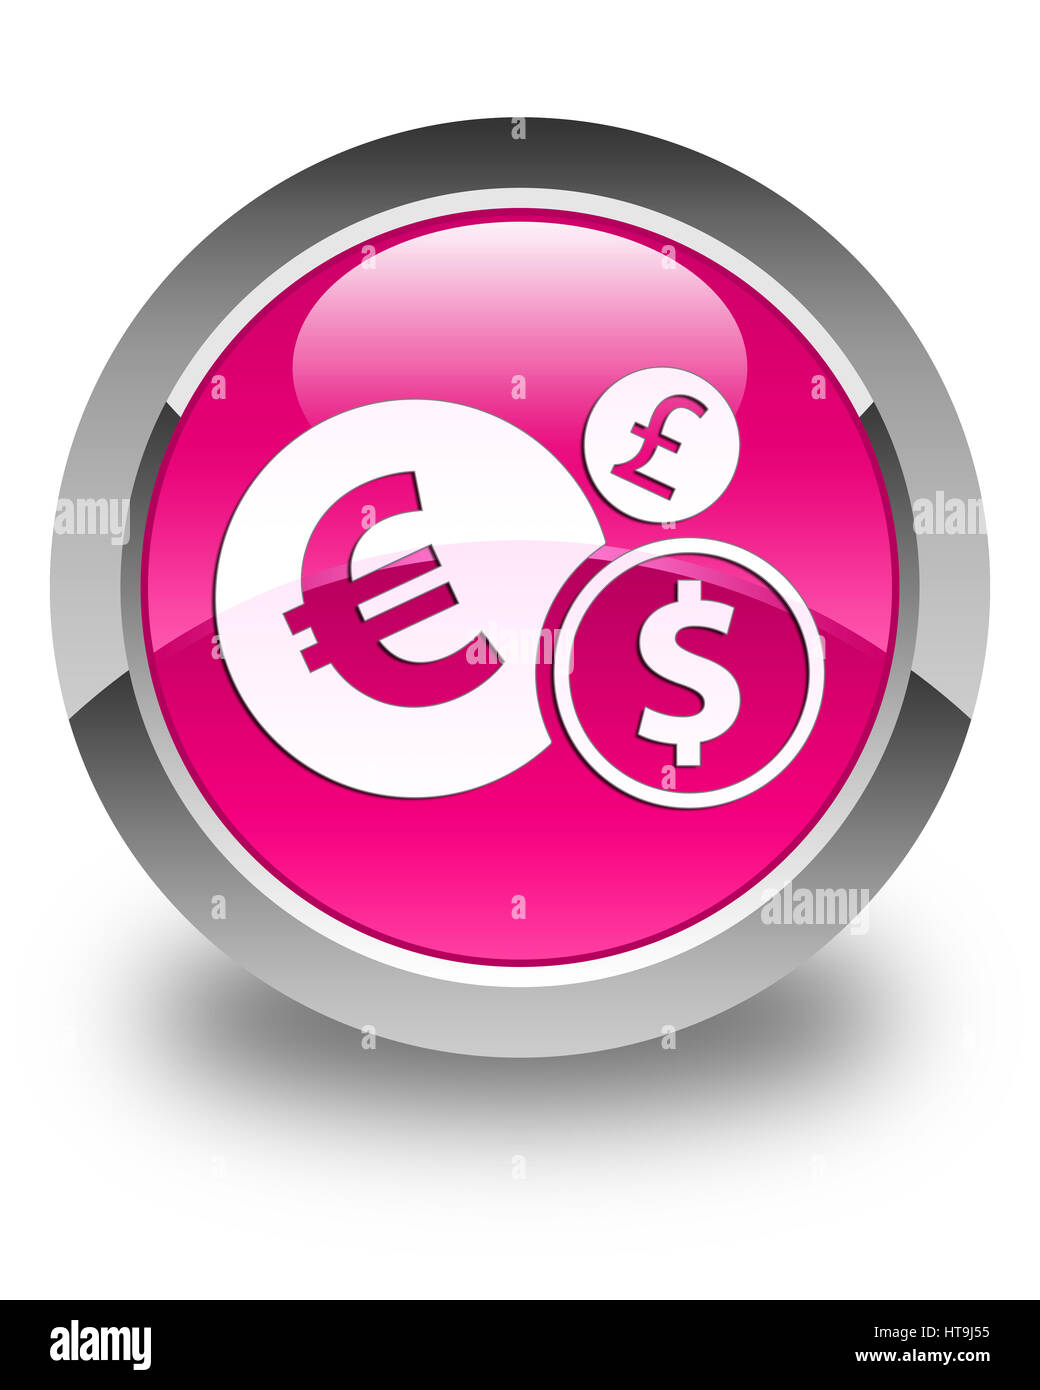 Finances icon isolated on glossy pink round button abstract illustration Stock Photo